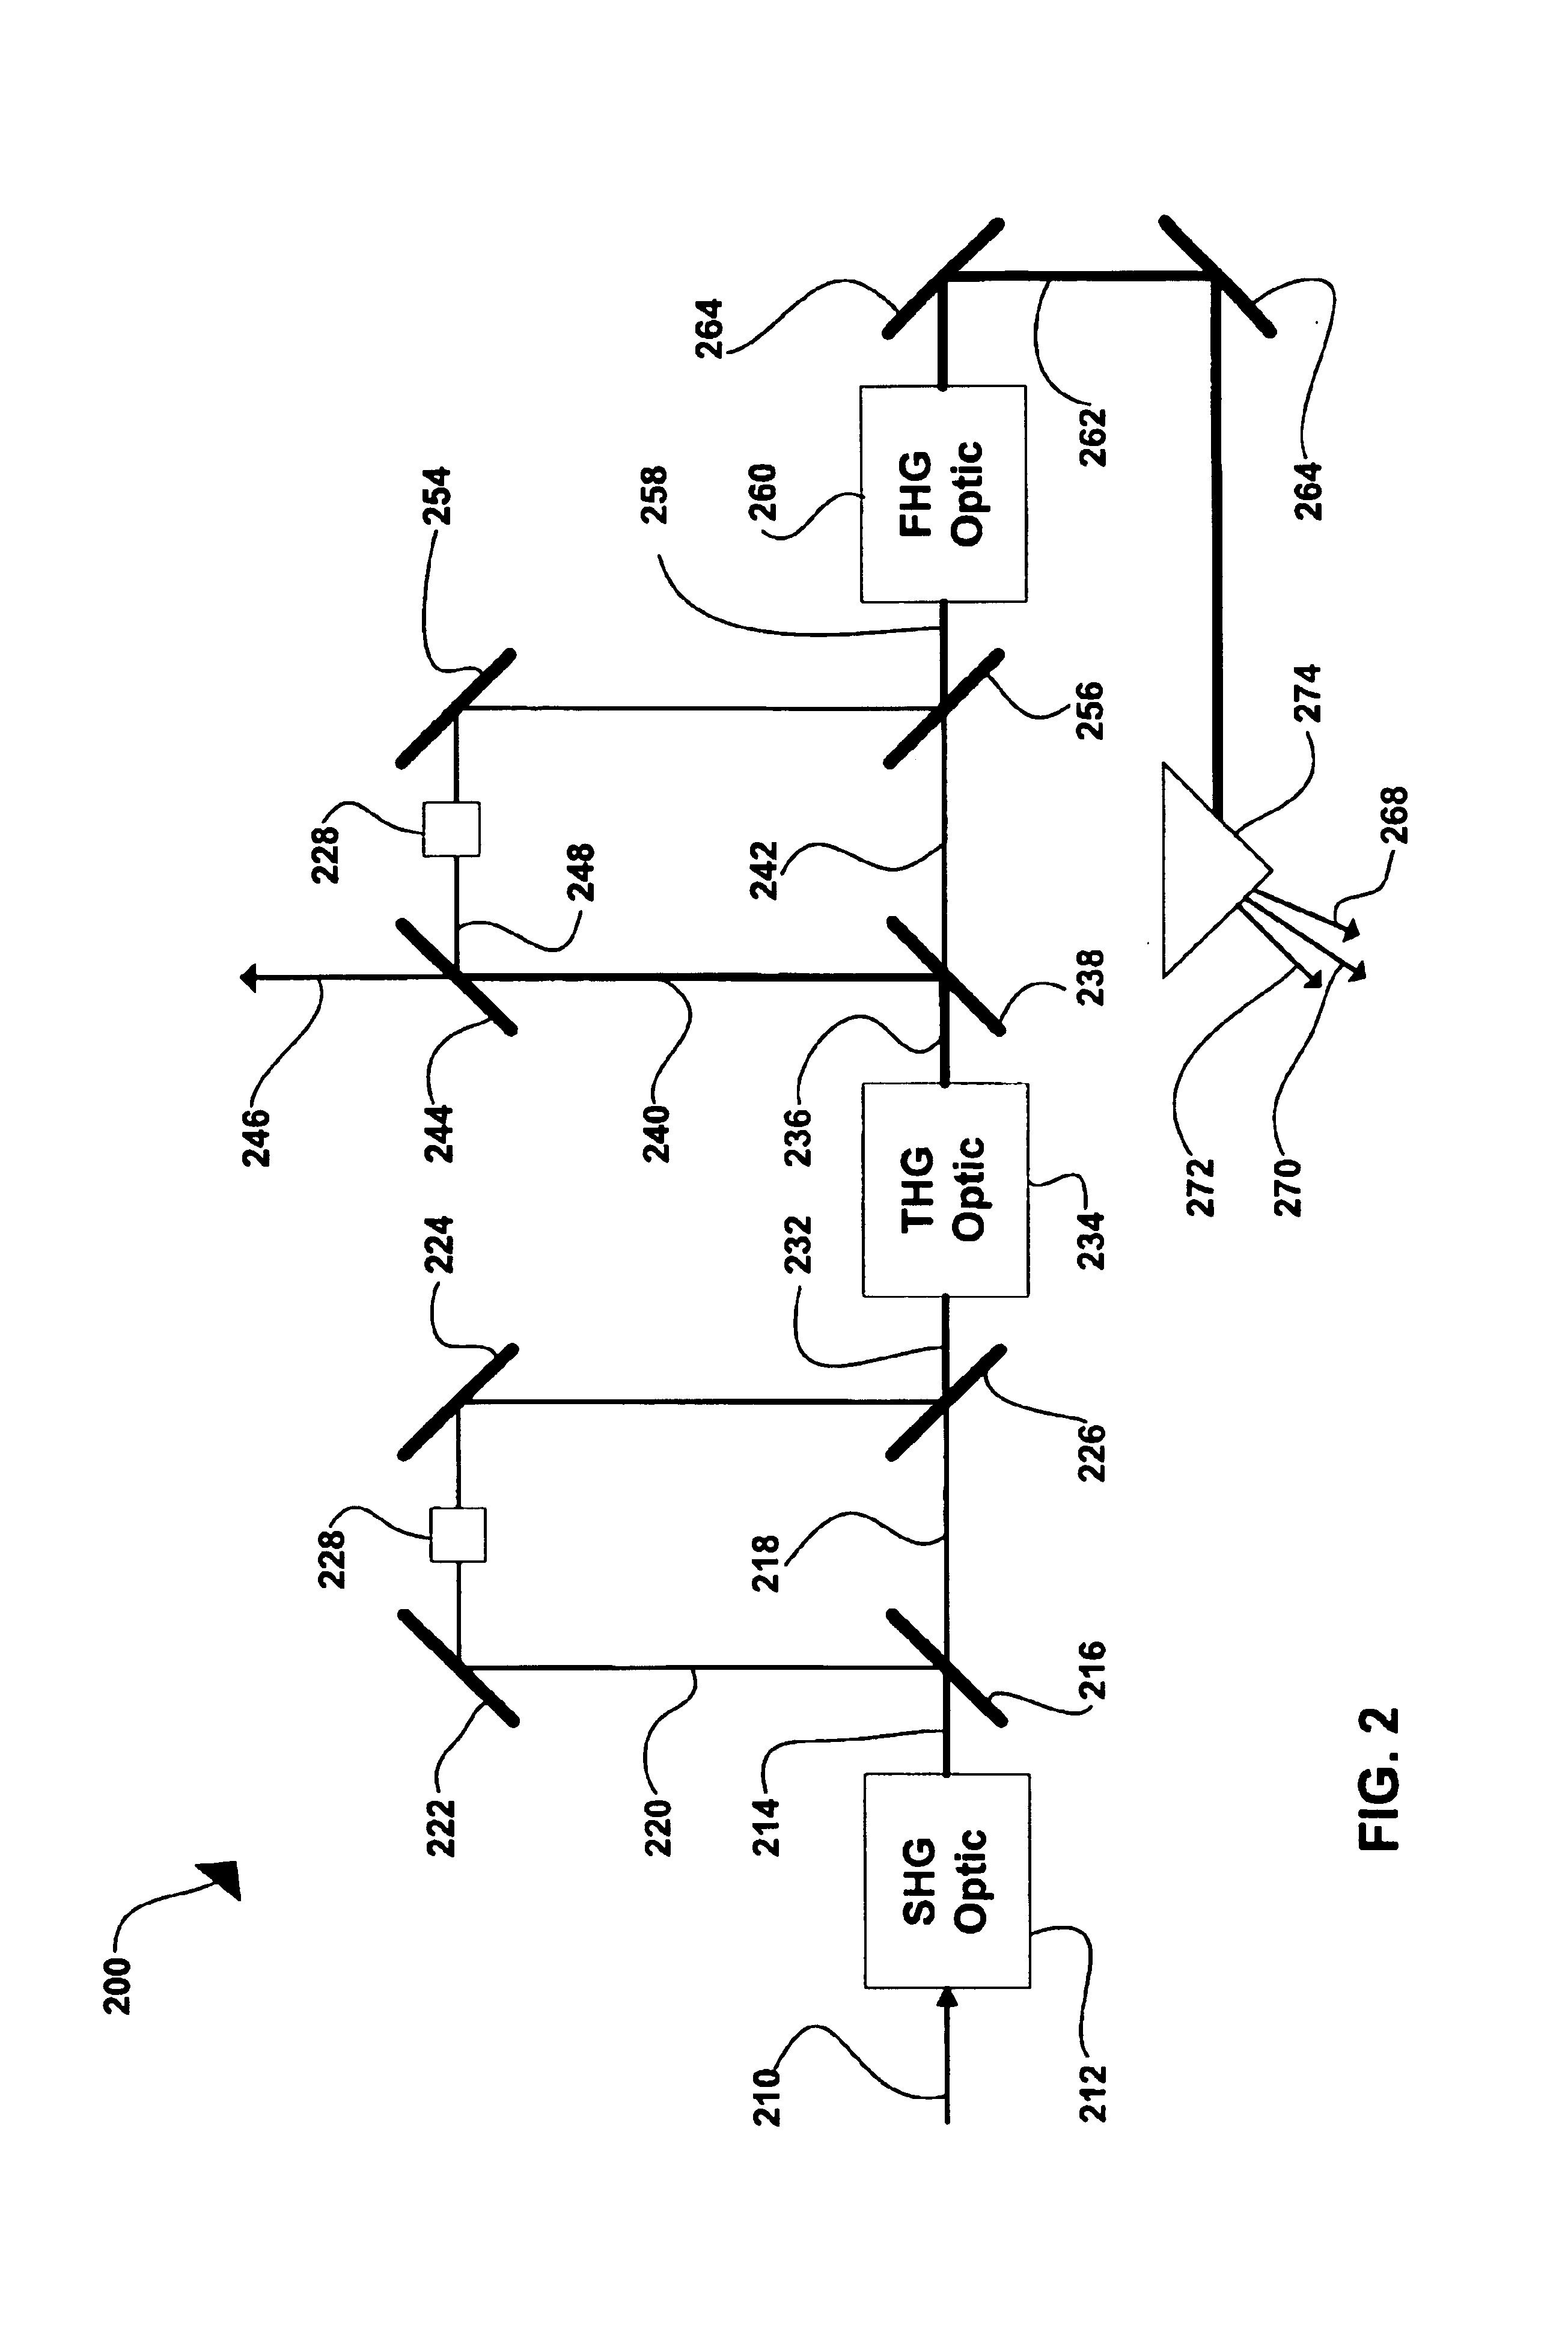 Solid state system and method for generating ultraviolet light